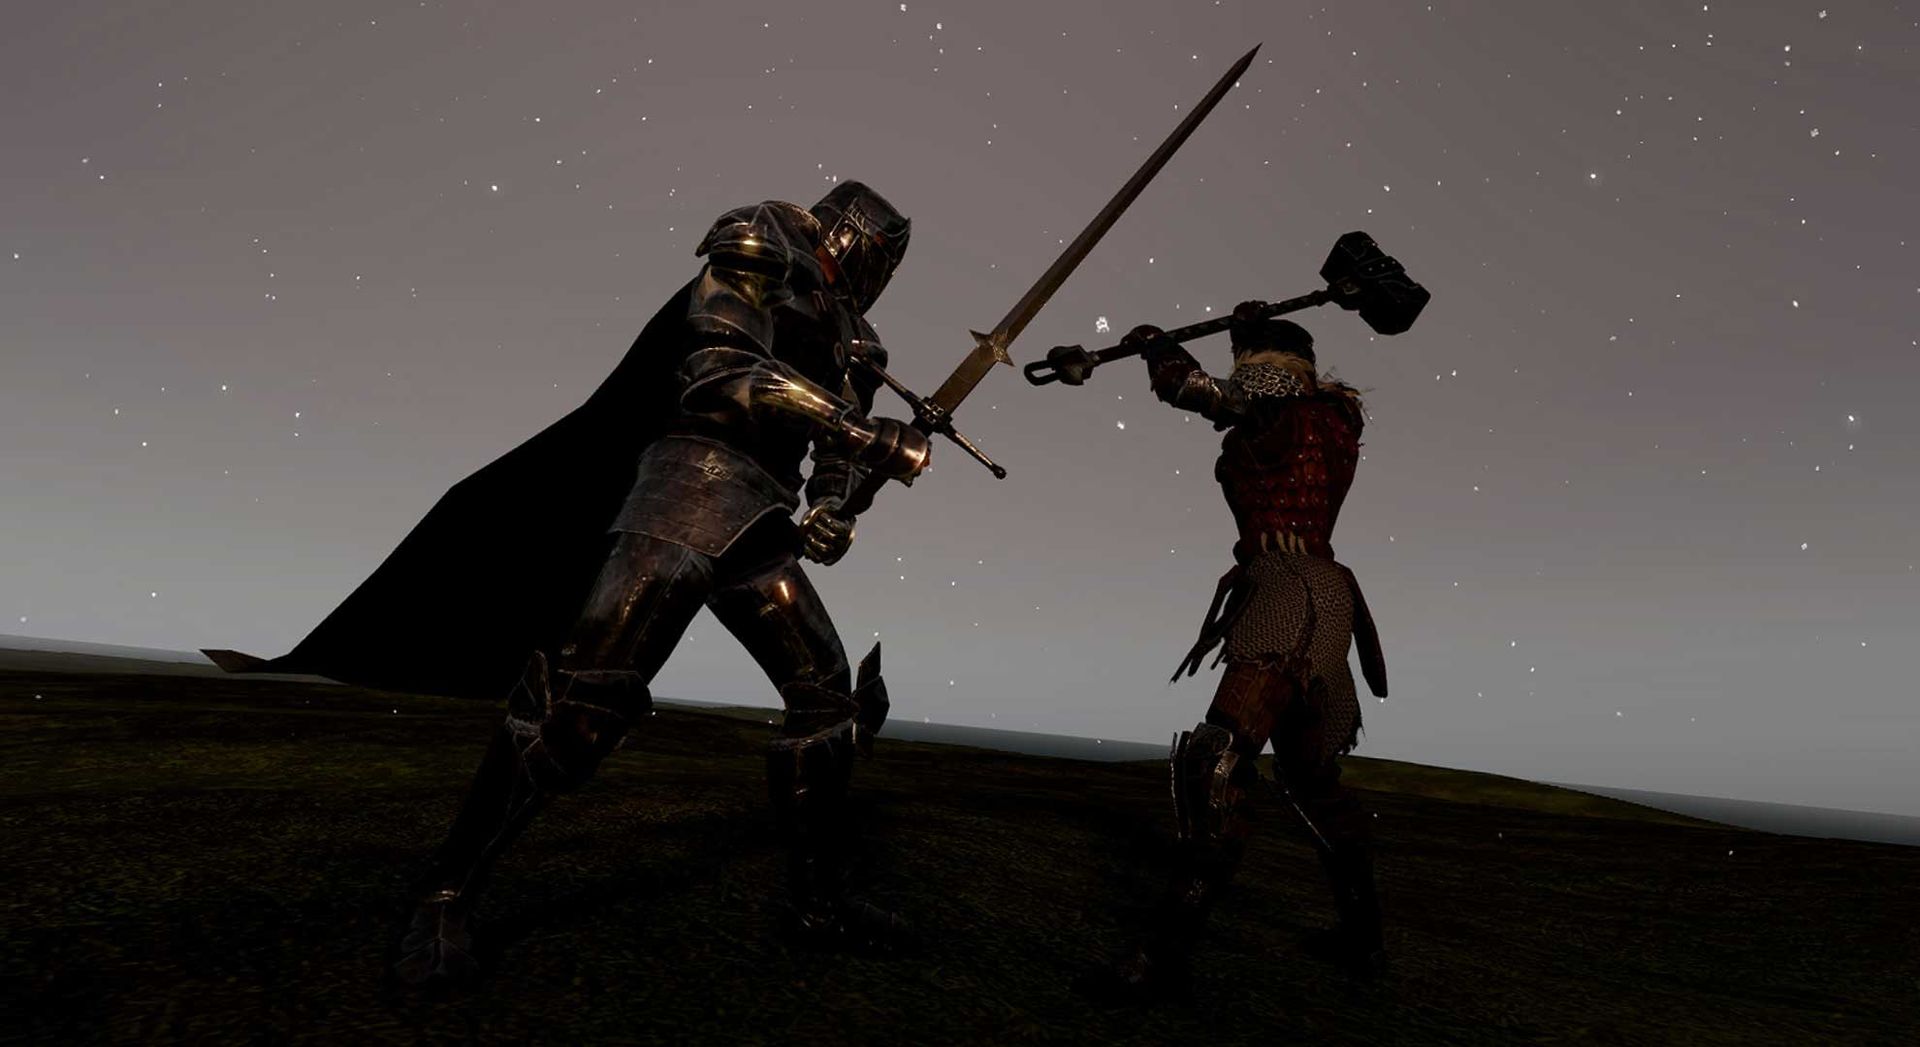 camelot unchained, the mmo that raised more than $2.2m on kickstarter in 2013, actually has a release target